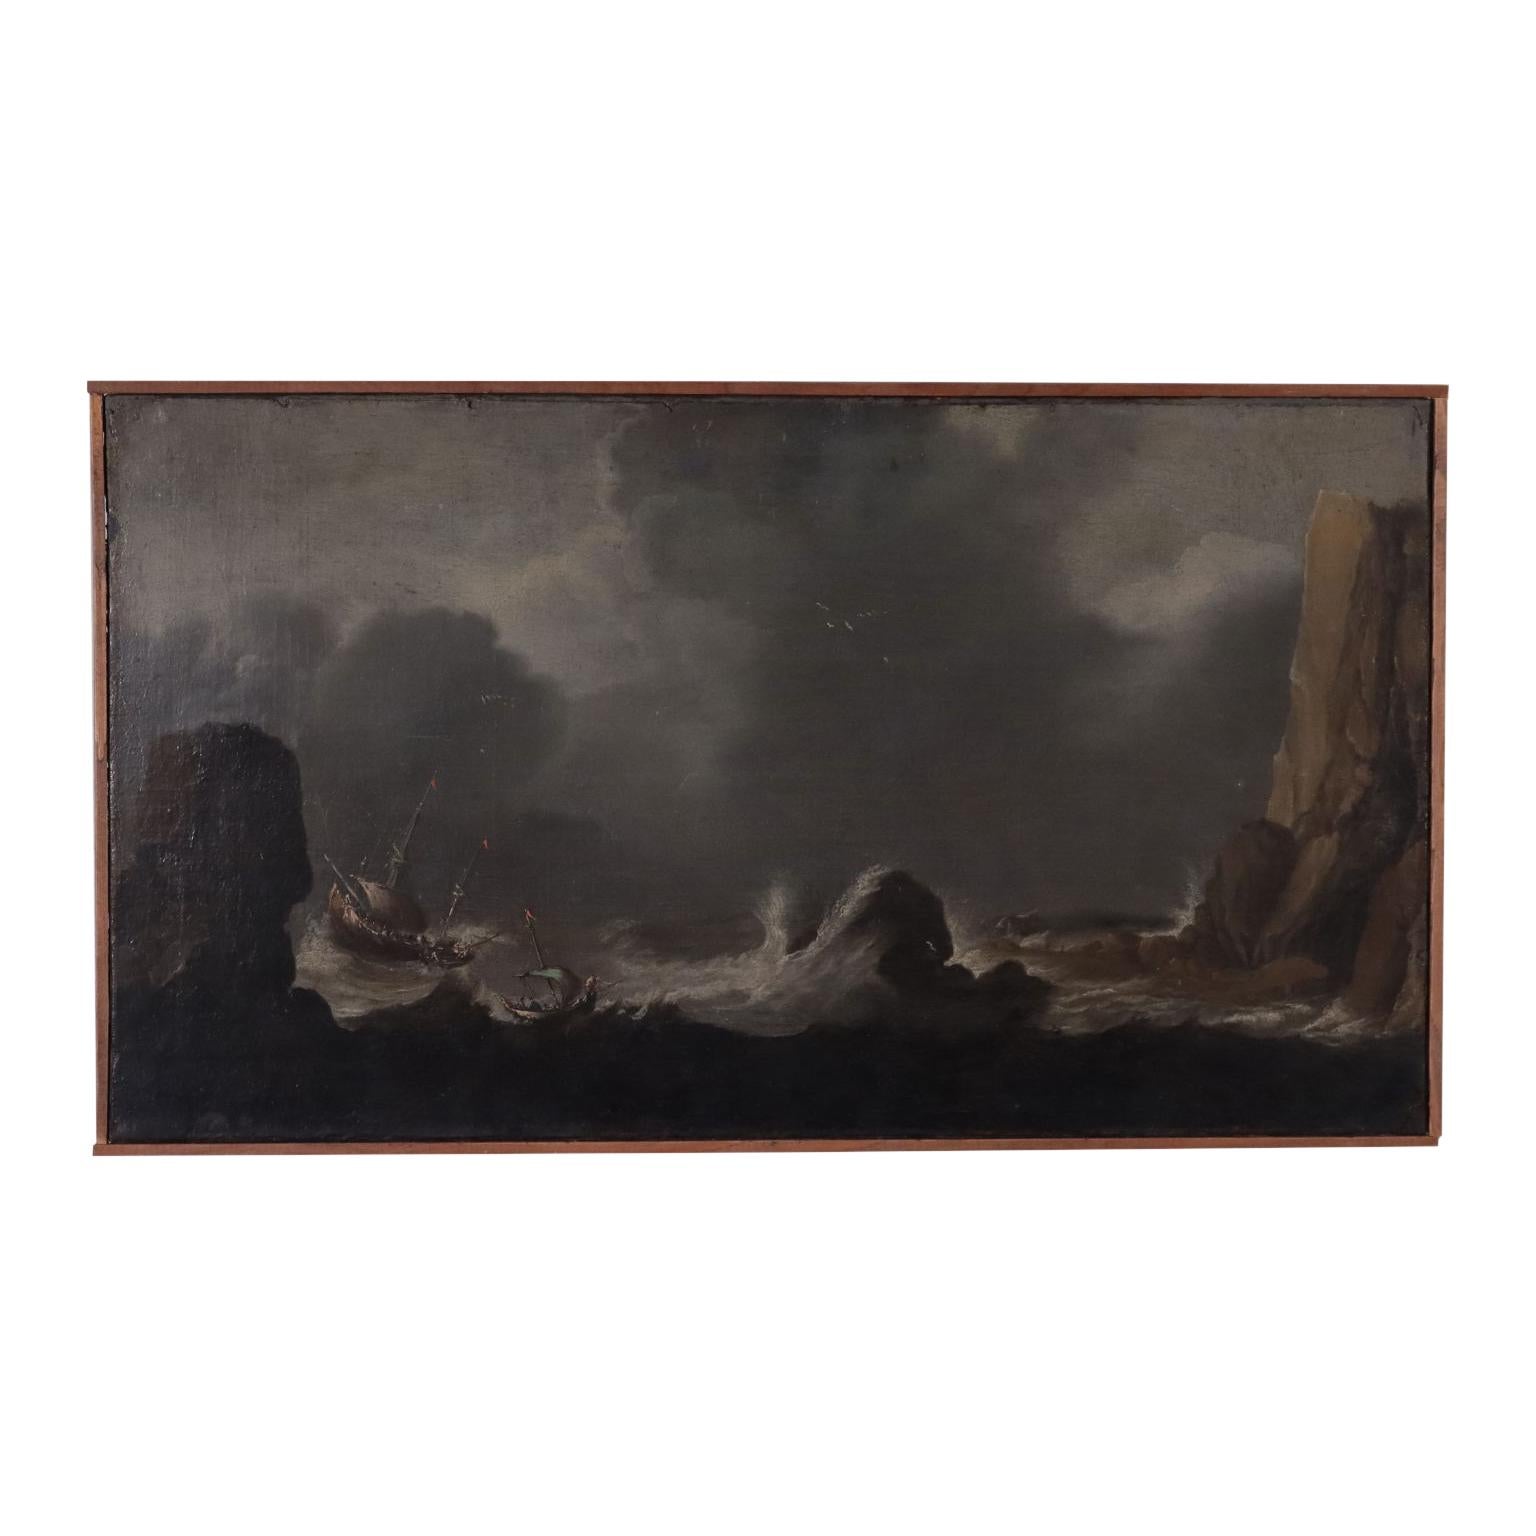 Unknown Landscape Painting - Stormy Sea Oil on Canvas 18th Century